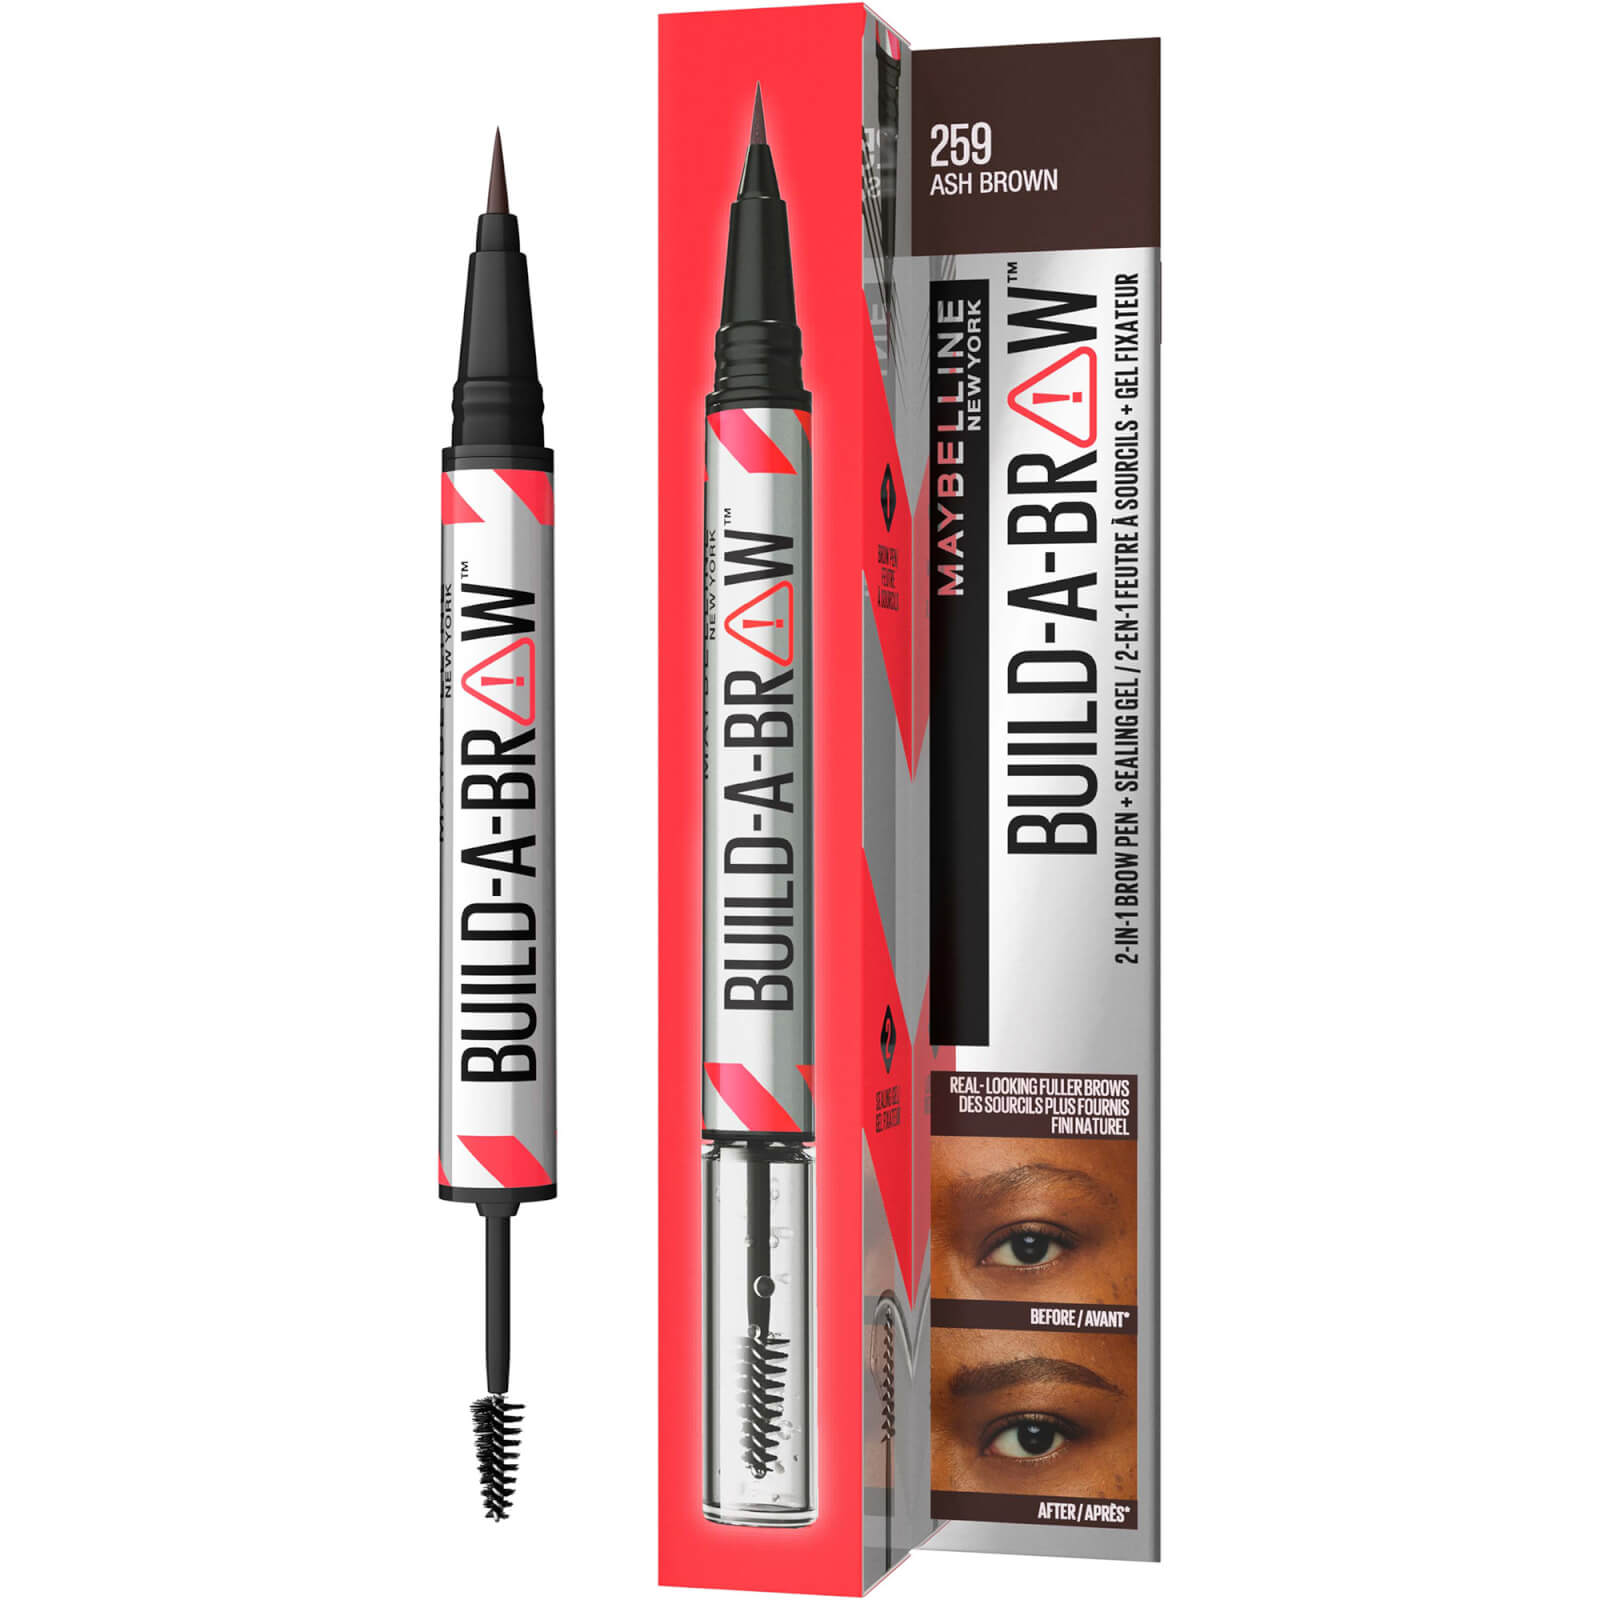 Image of Maybelline Build-A-Brow 2 Easy Steps Eye Brow Pencil and Gel (Various Shades) - Ash Brown